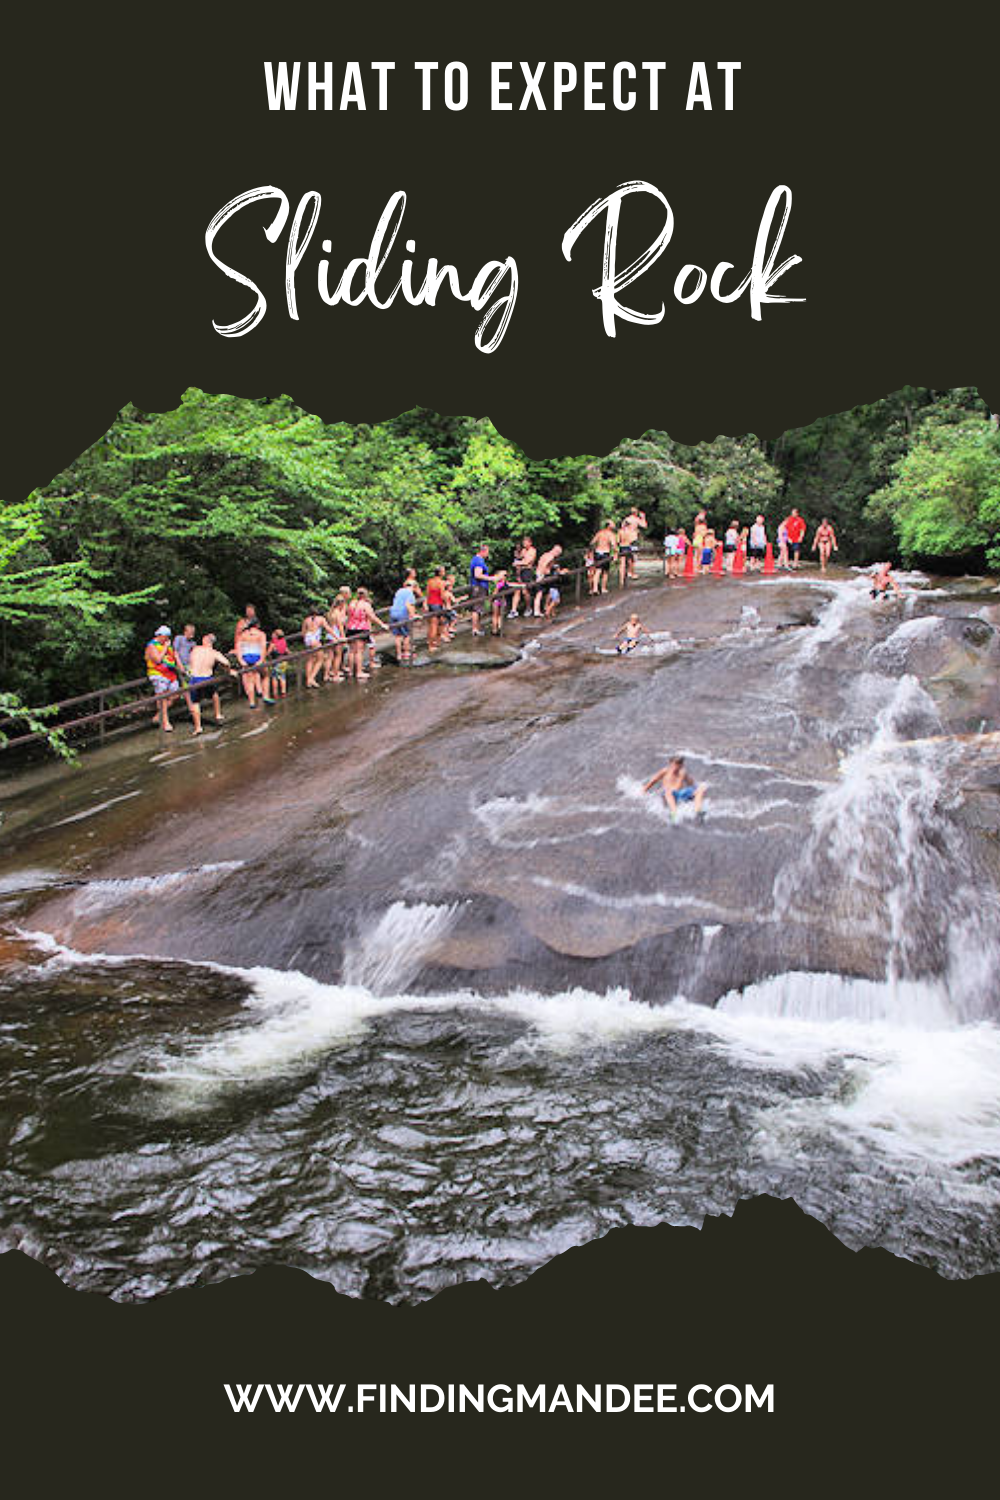 What to Expect at Sliding Rock | Finding Mandee